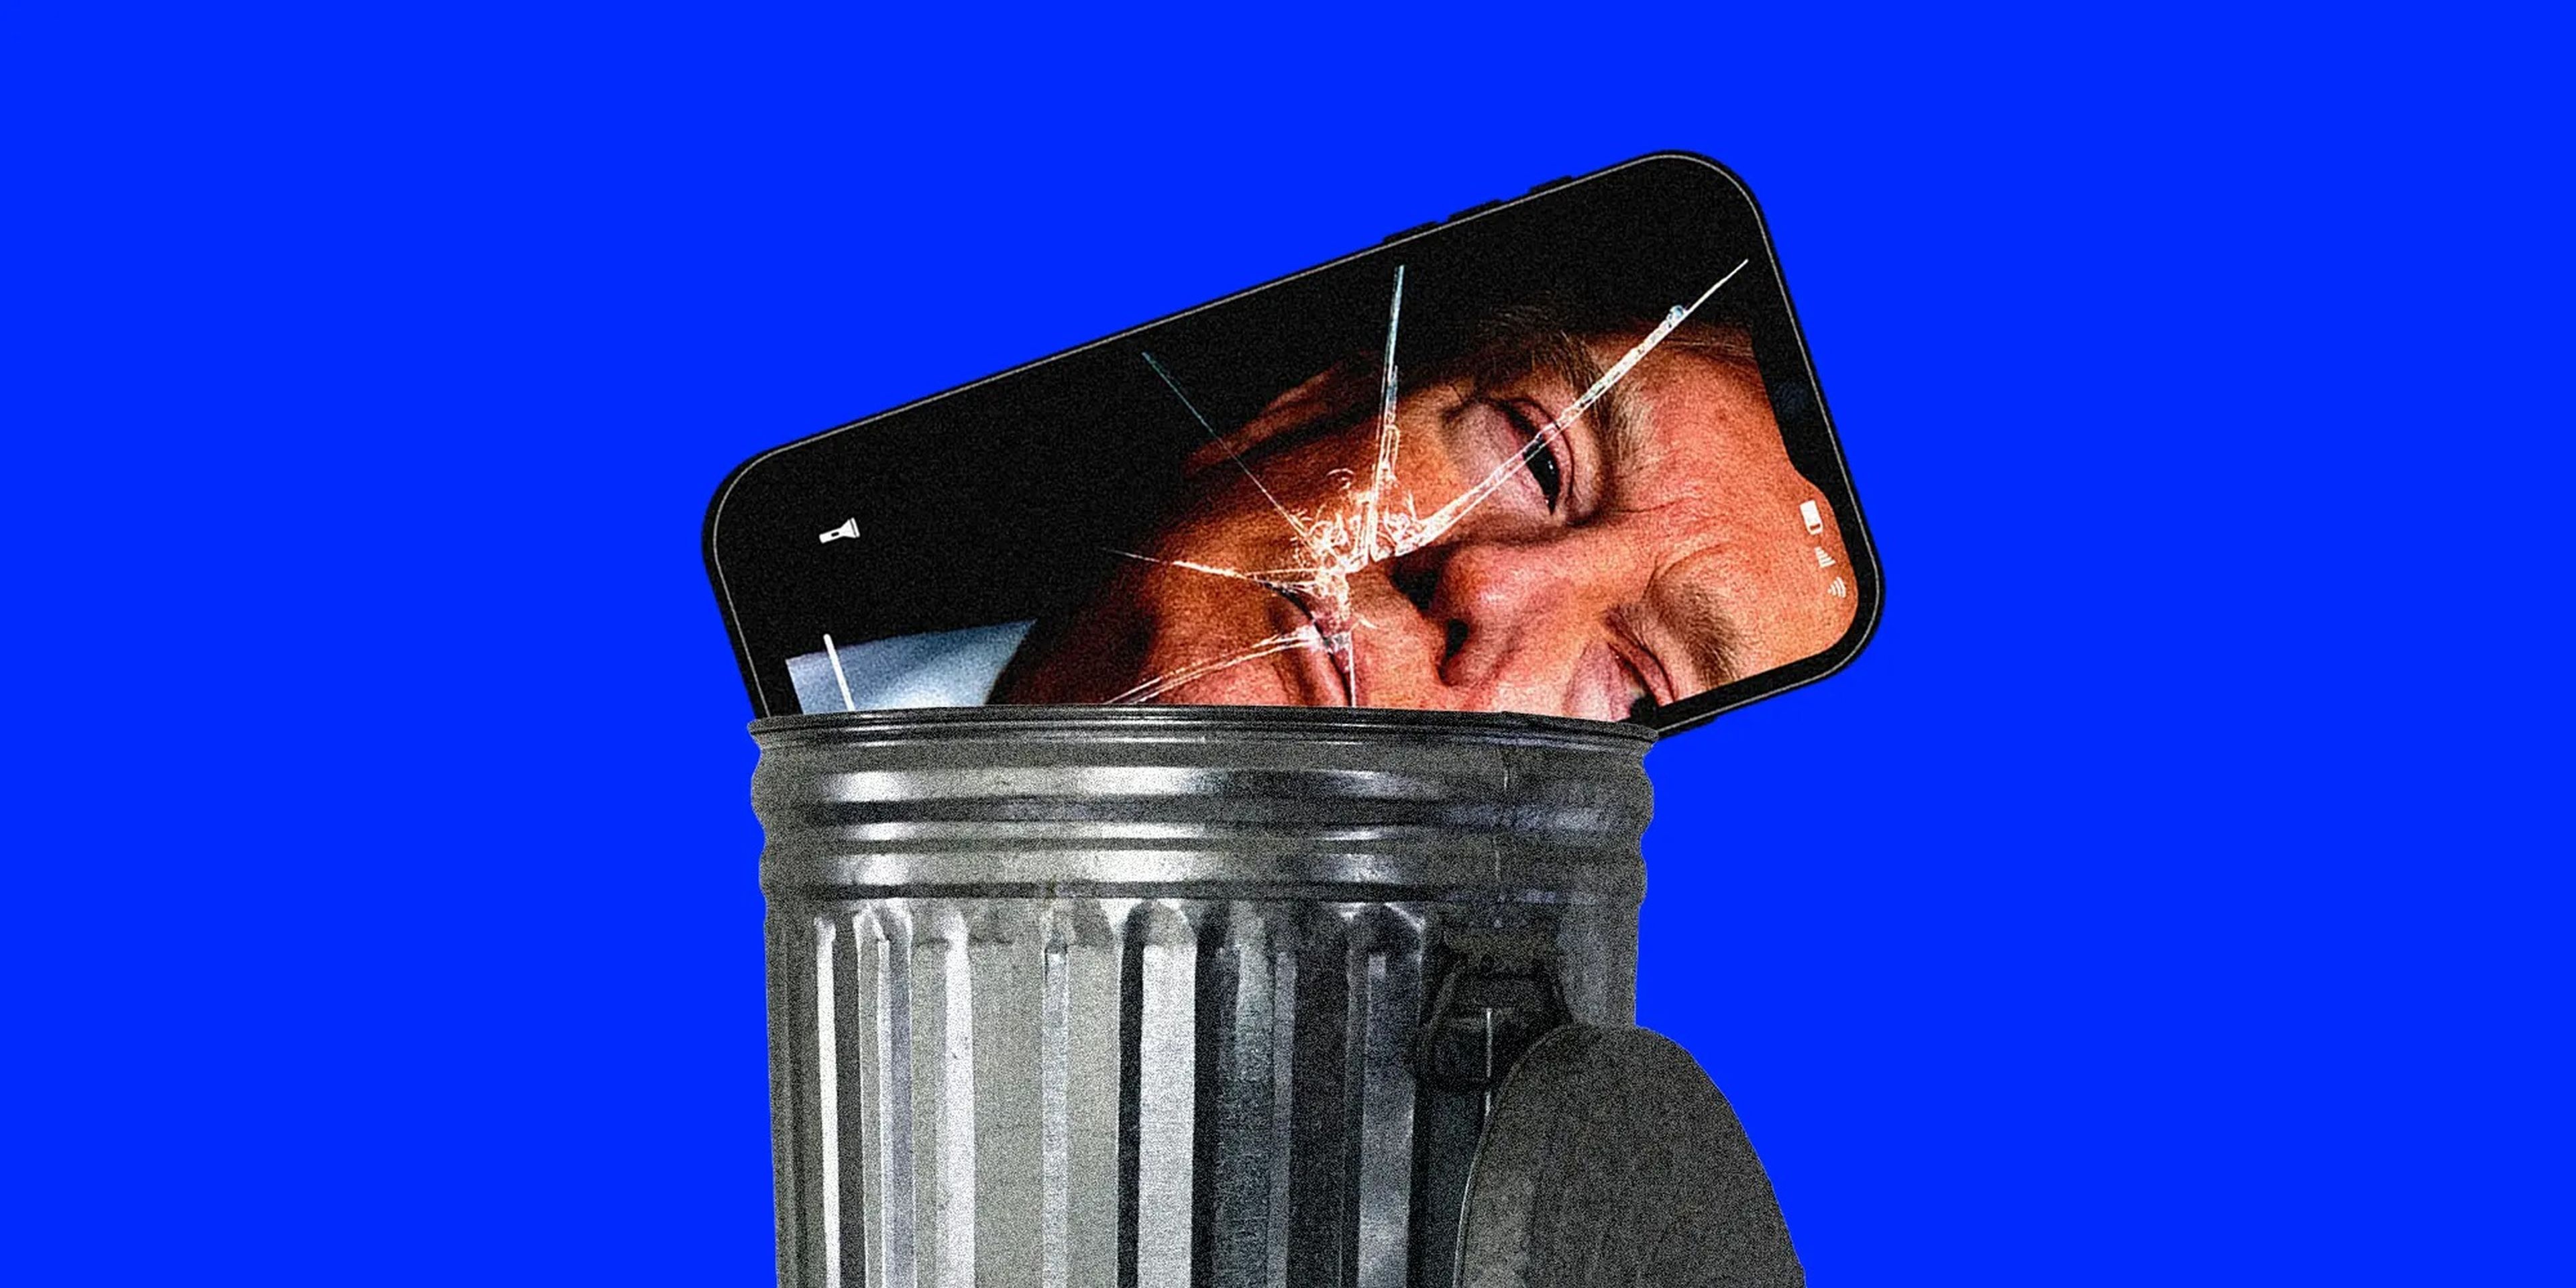 A phone with Trump's face in a garbage can